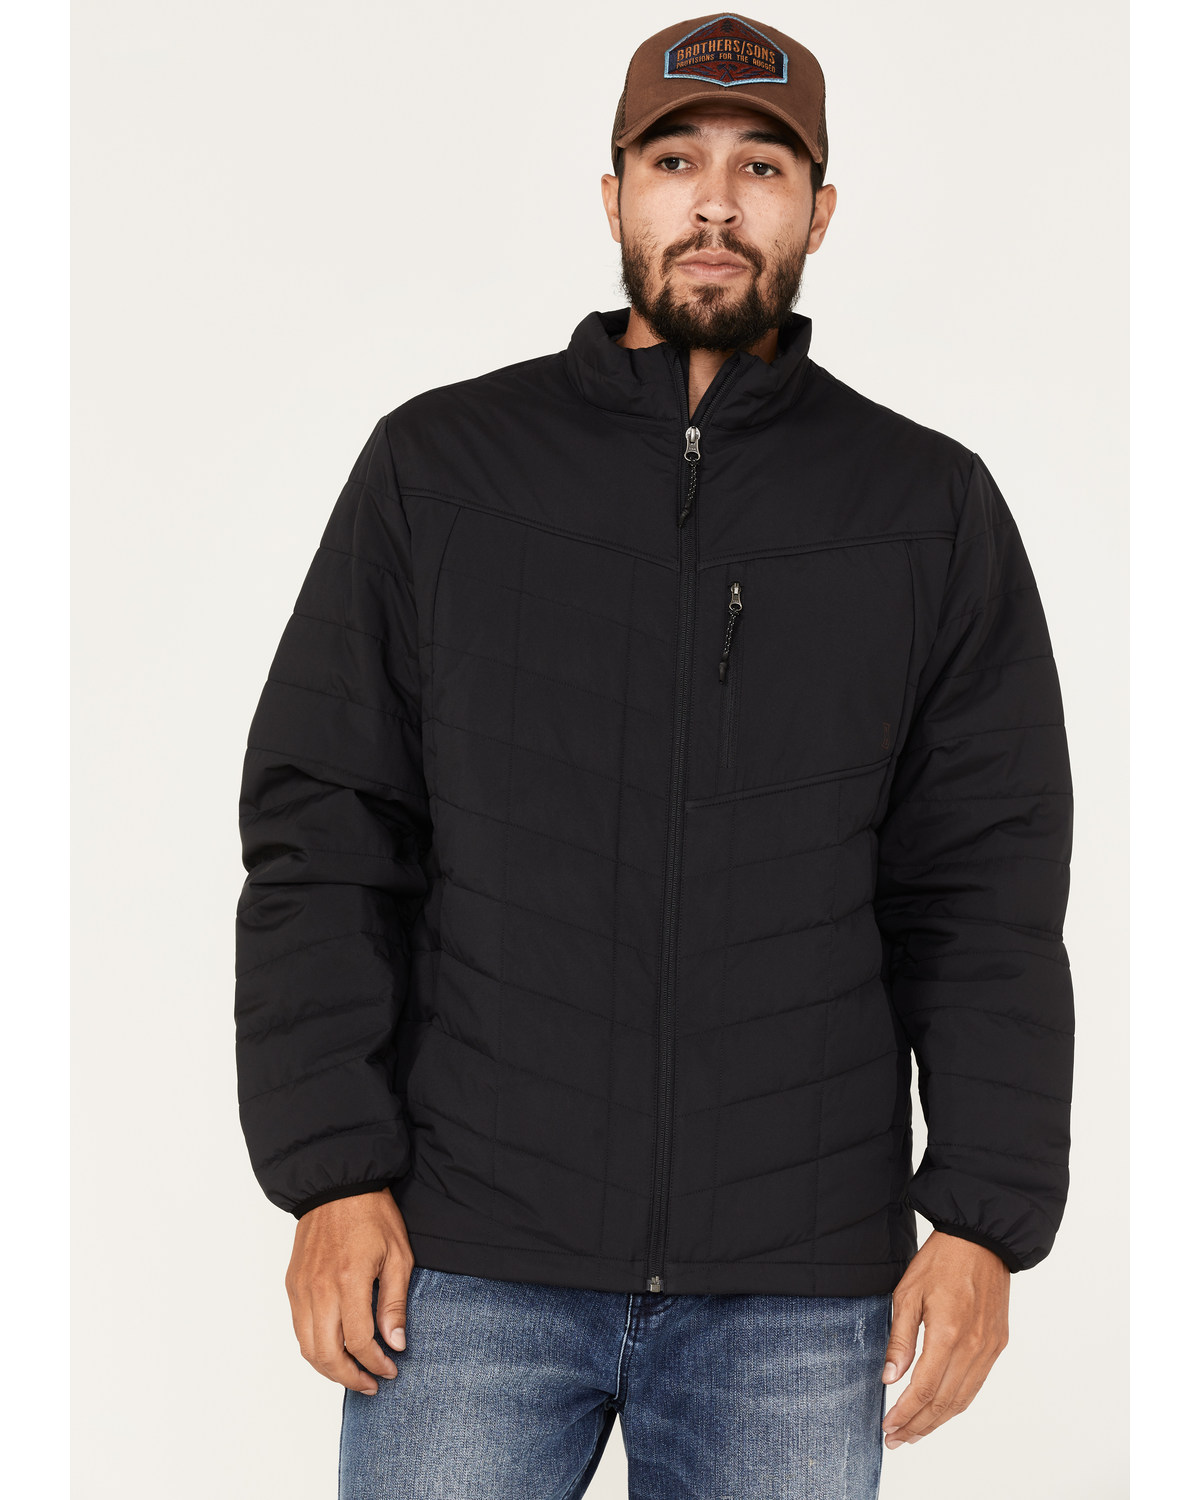 Brothers and Sons Men's Performance Lightweight Puffer Packable Jacket